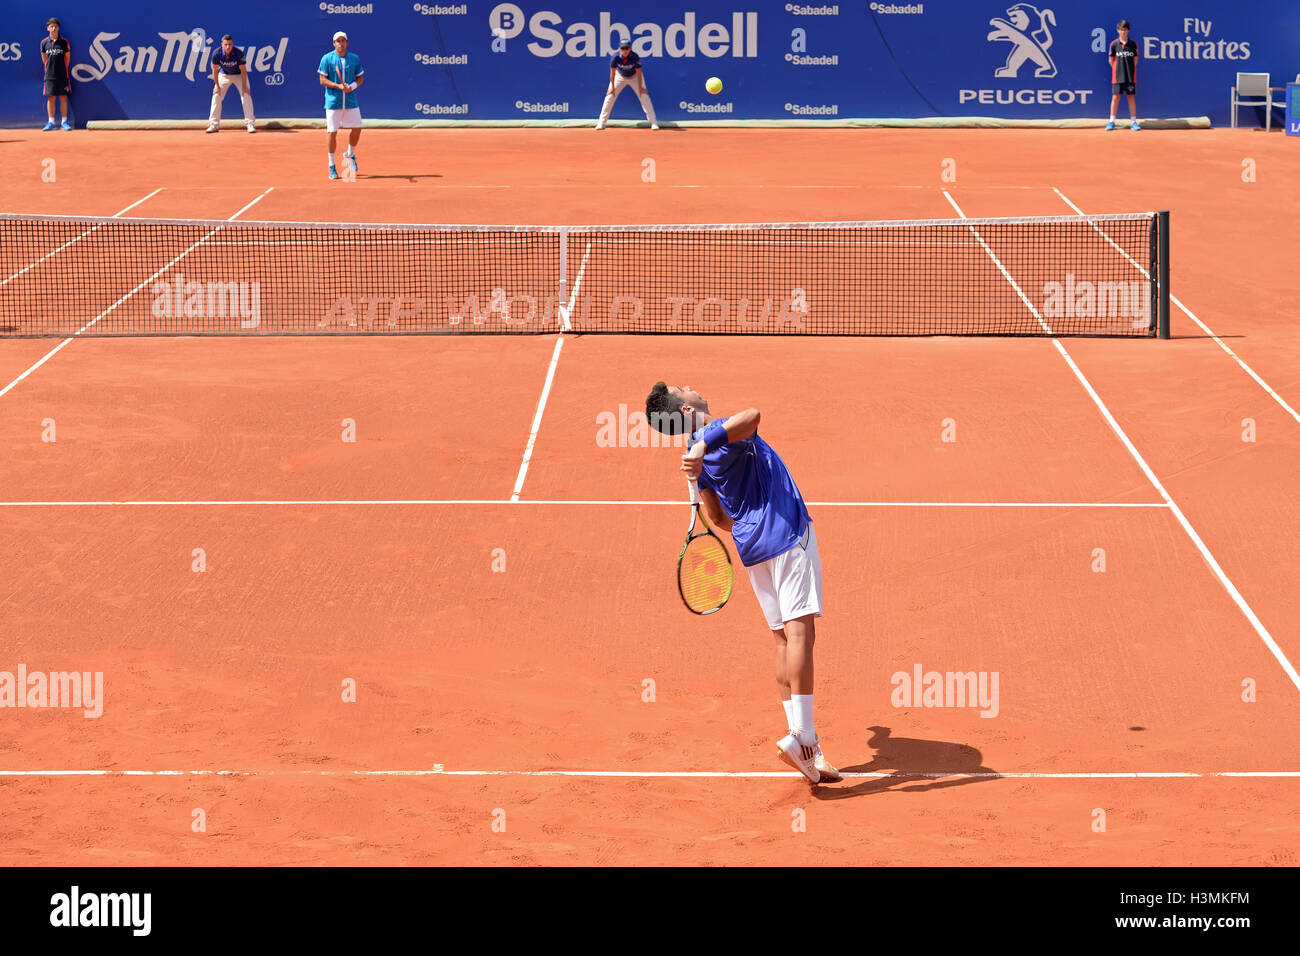 BARCELONA - APR 18: Jaume Munar (Spanish tennis player) plays at the ATP Barcelona Open. Stock Photo